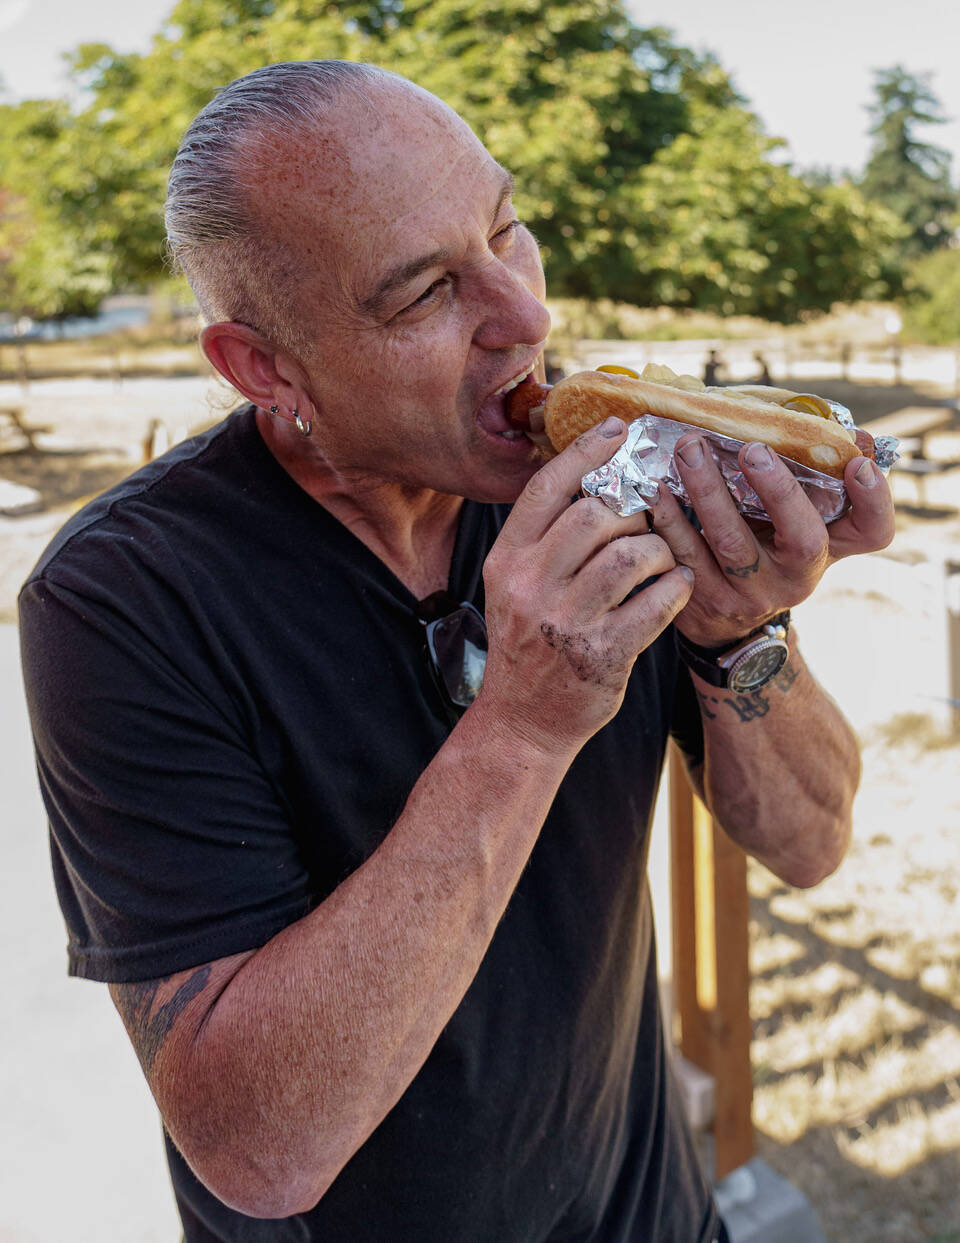 An employee of Penn Cove Brewing Company enjoys a hot dog. (Photo by David Welton)